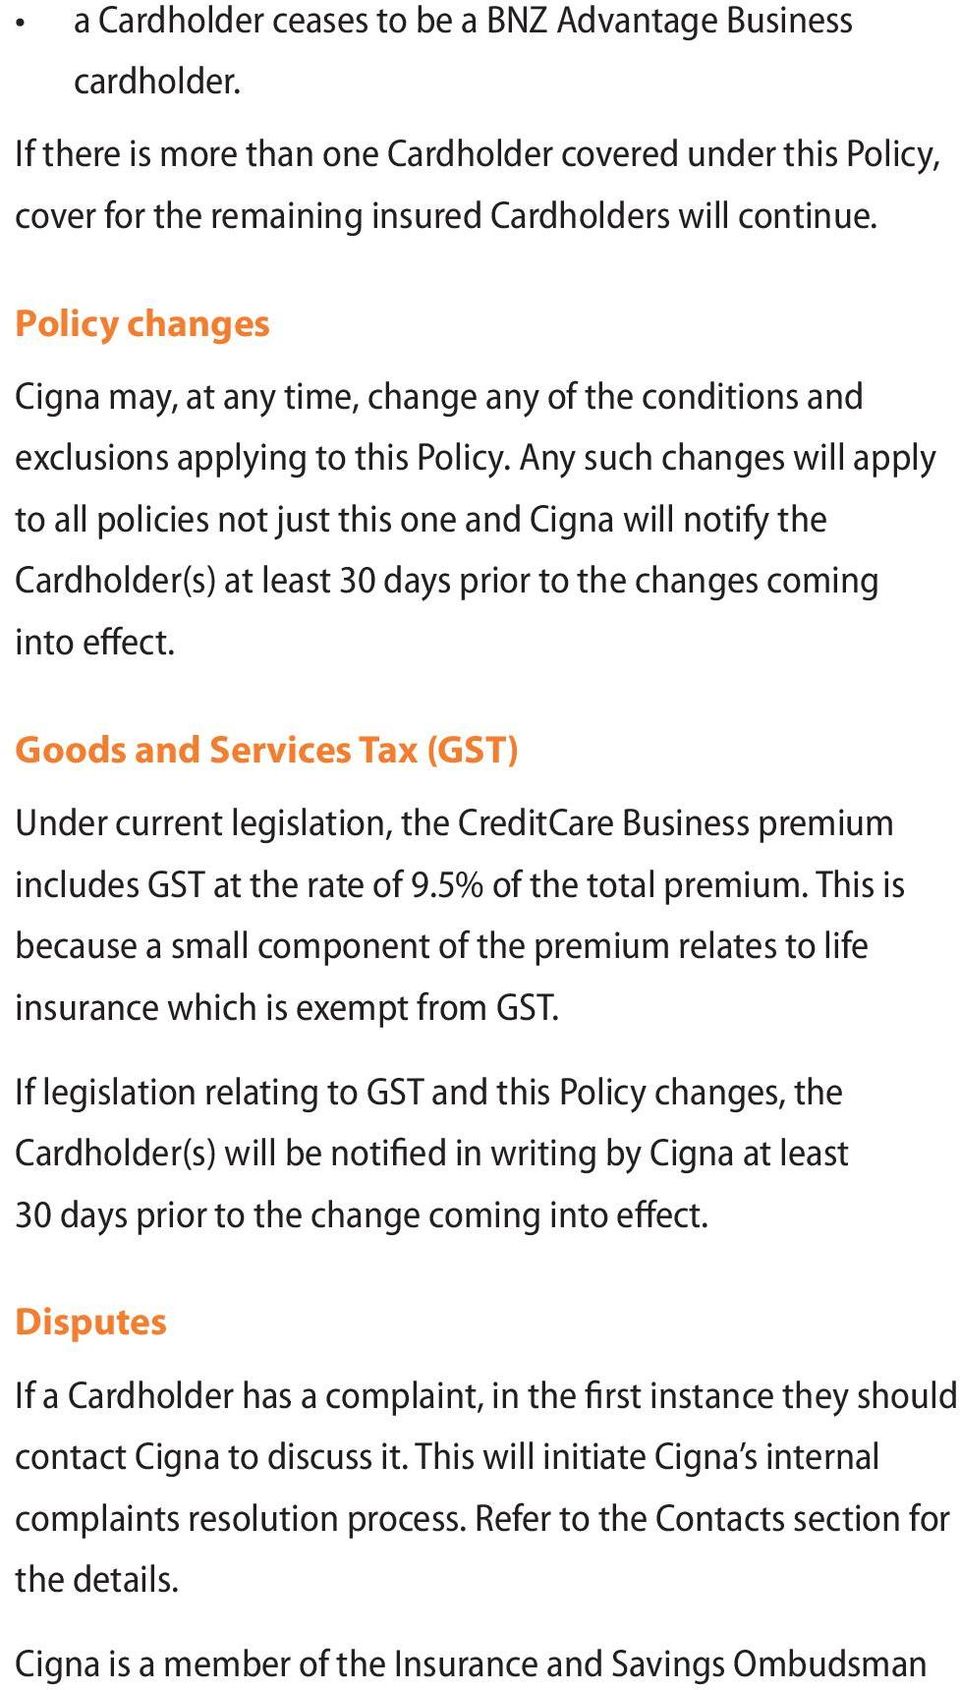 Any such changes will apply to all policies not just this one and Cigna will notify the Cardholder(s) at least 30 days prior to the changes coming into effect.